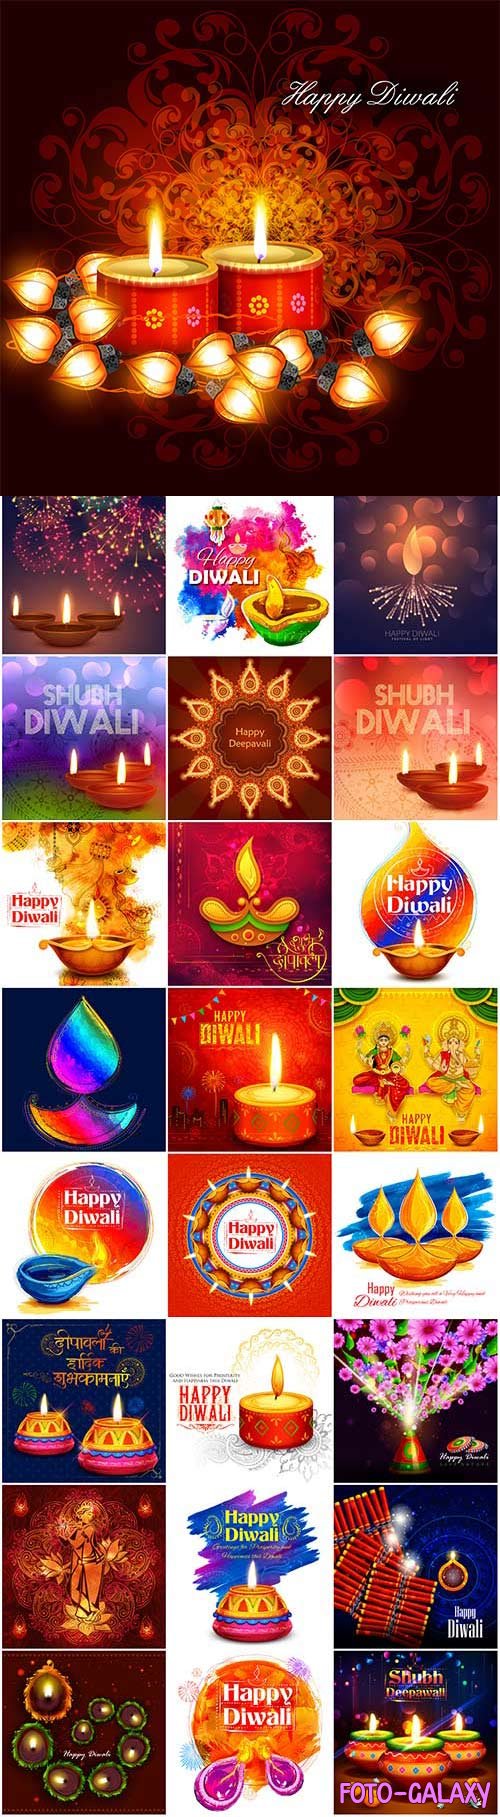 Diwali bright and colorful illustration in vector